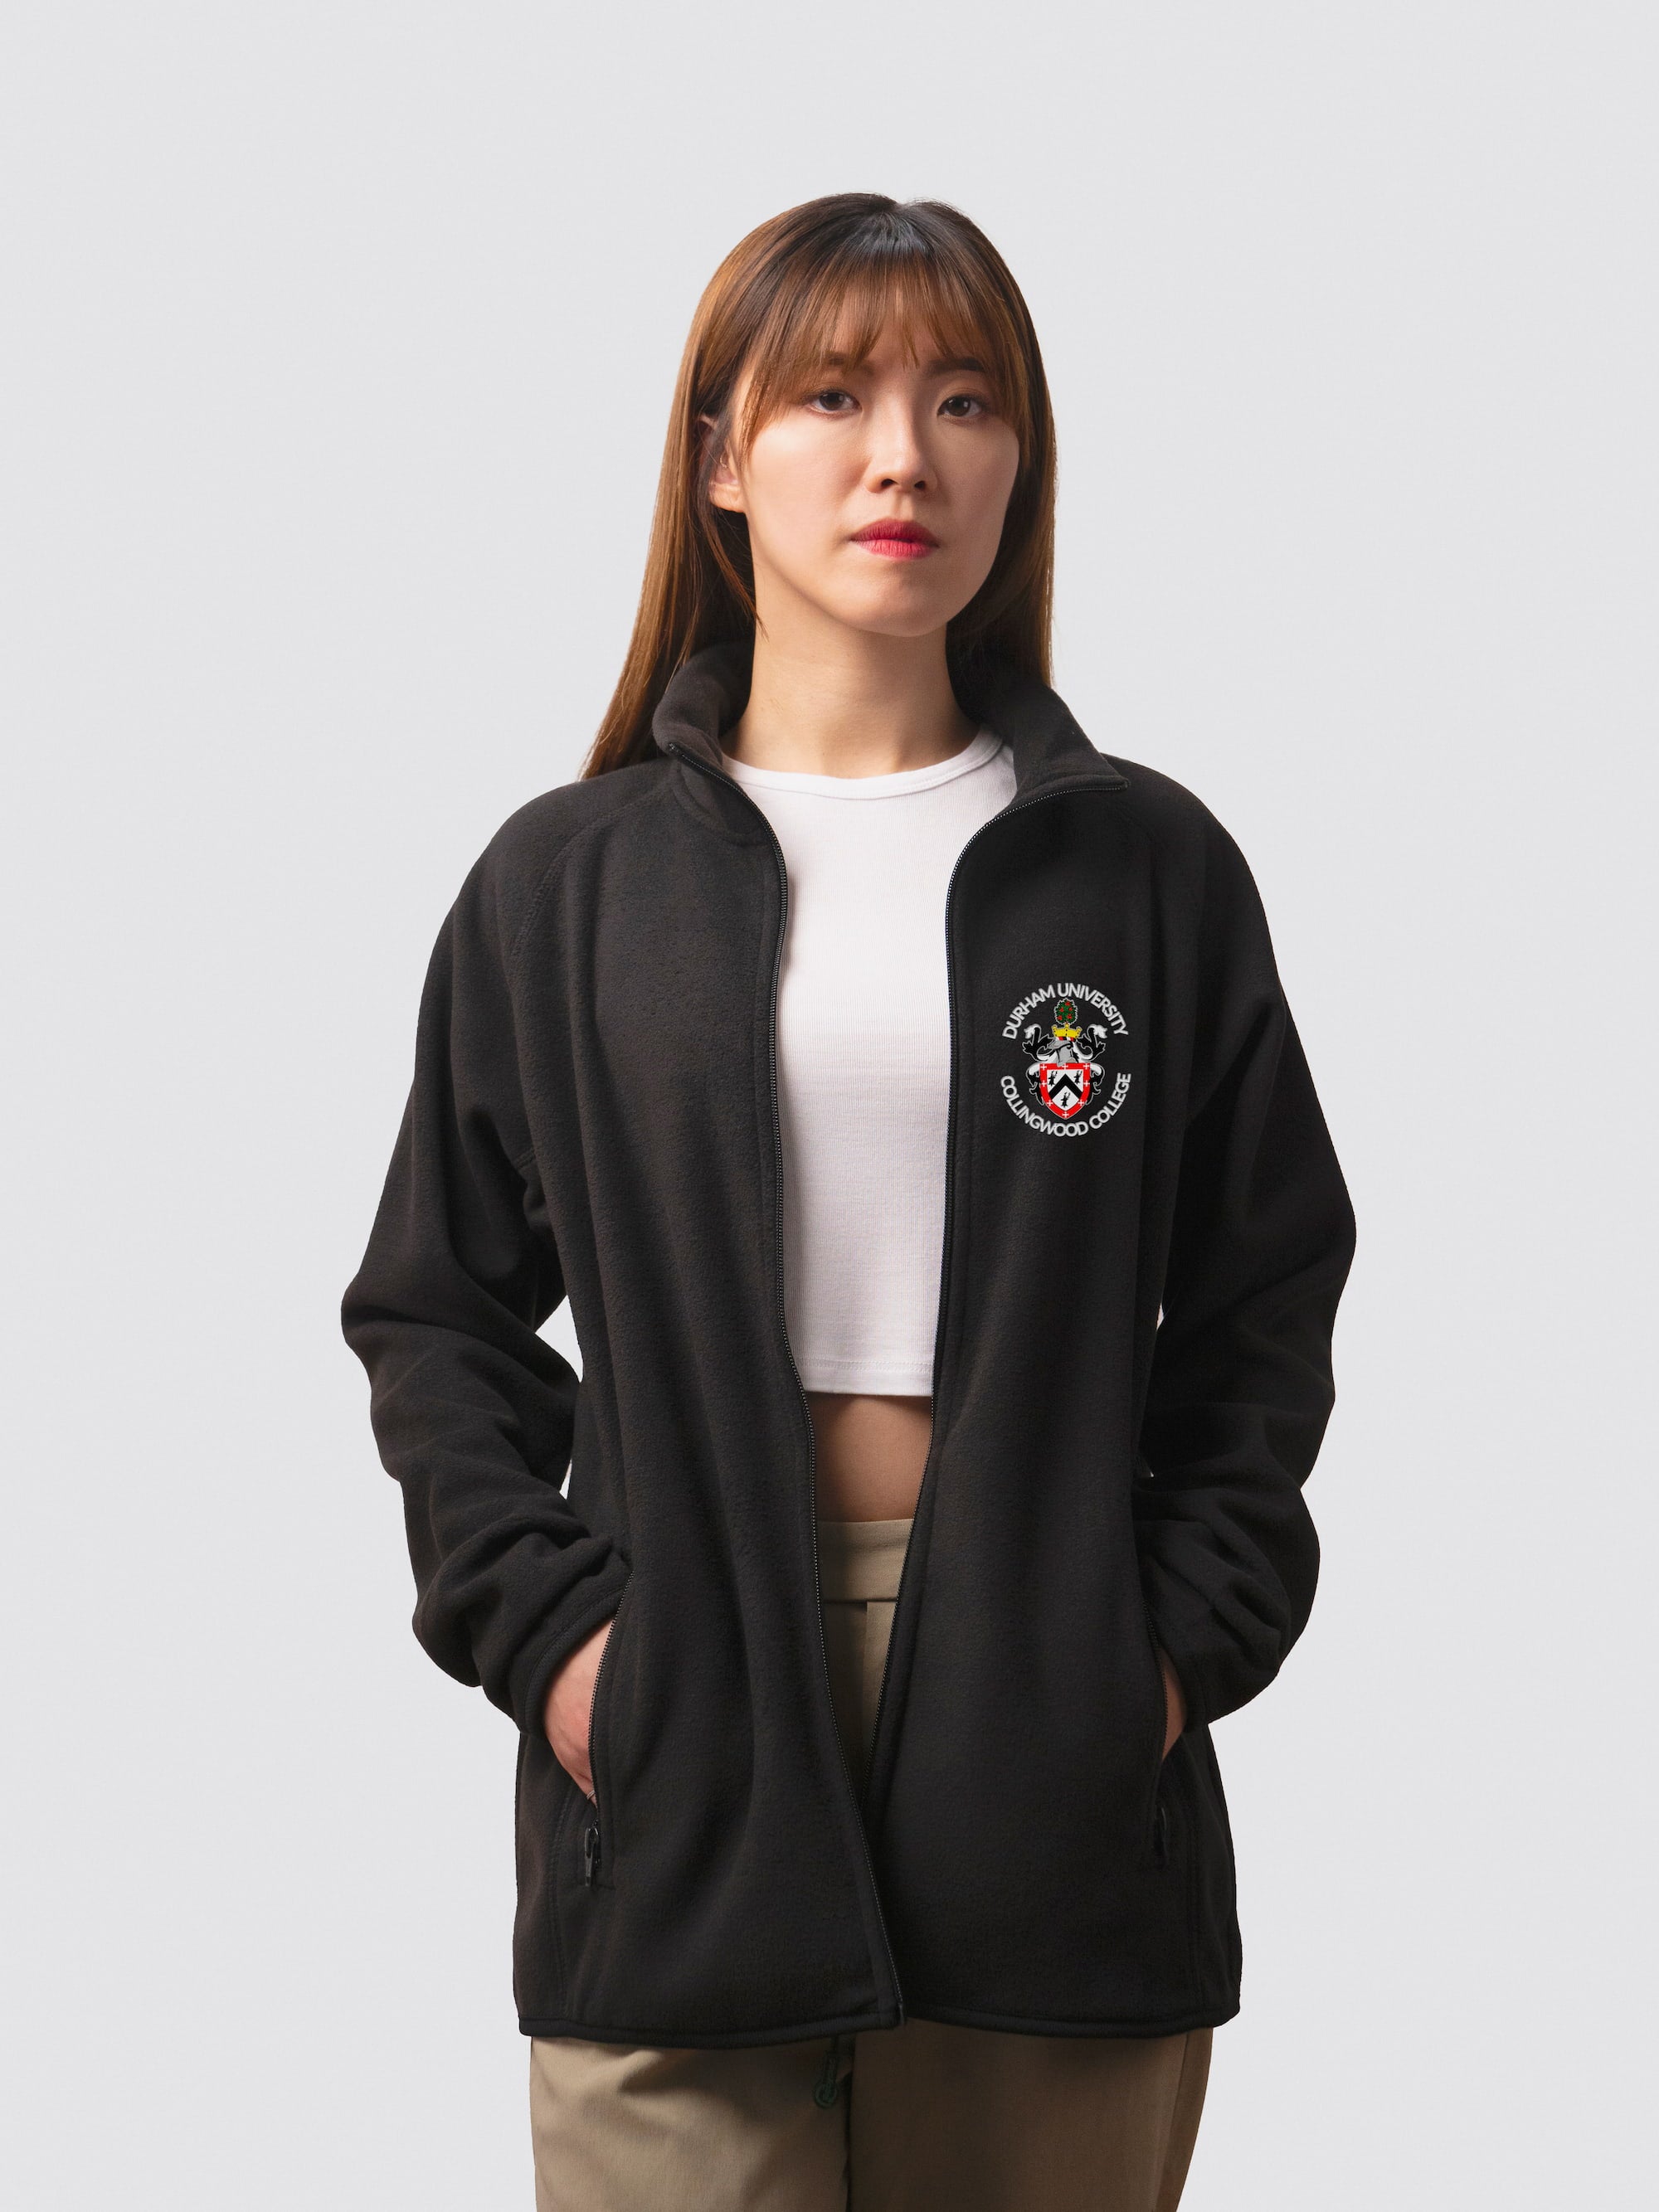 Custom student fleece, with Collingwood crest on the left chest